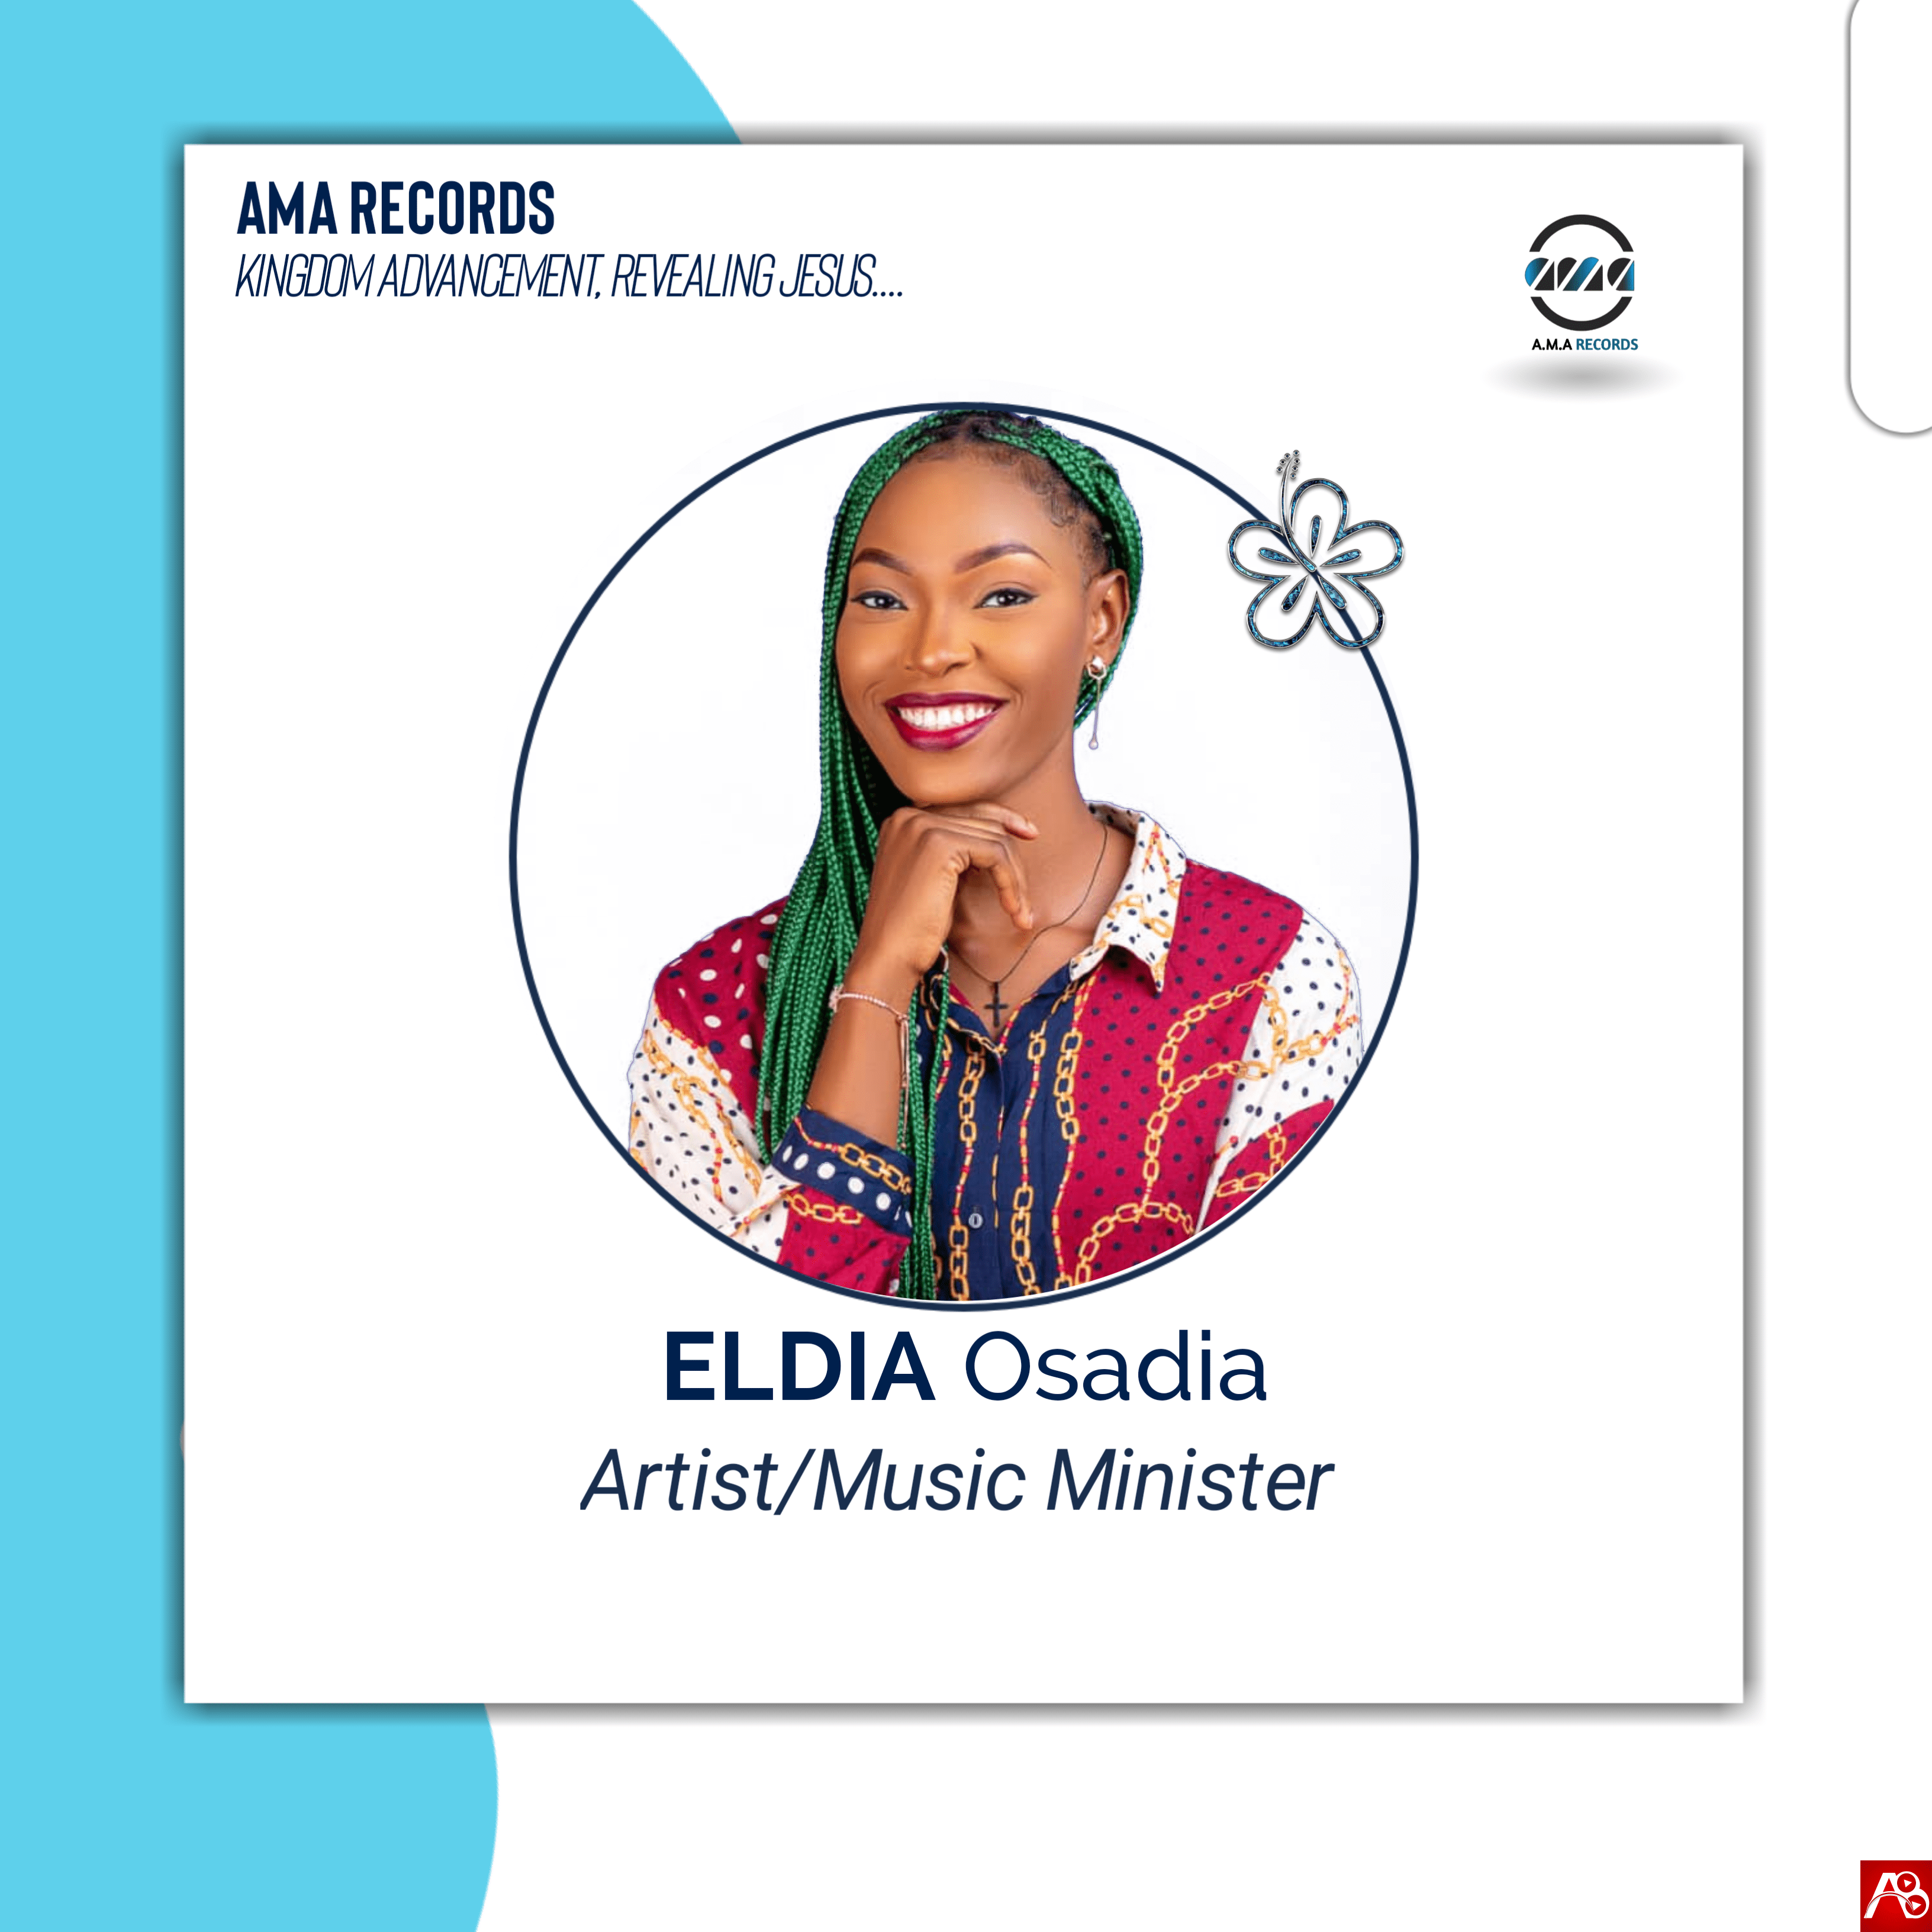 MA Records Announces the Official Signing of their First Artiste, Eldia)